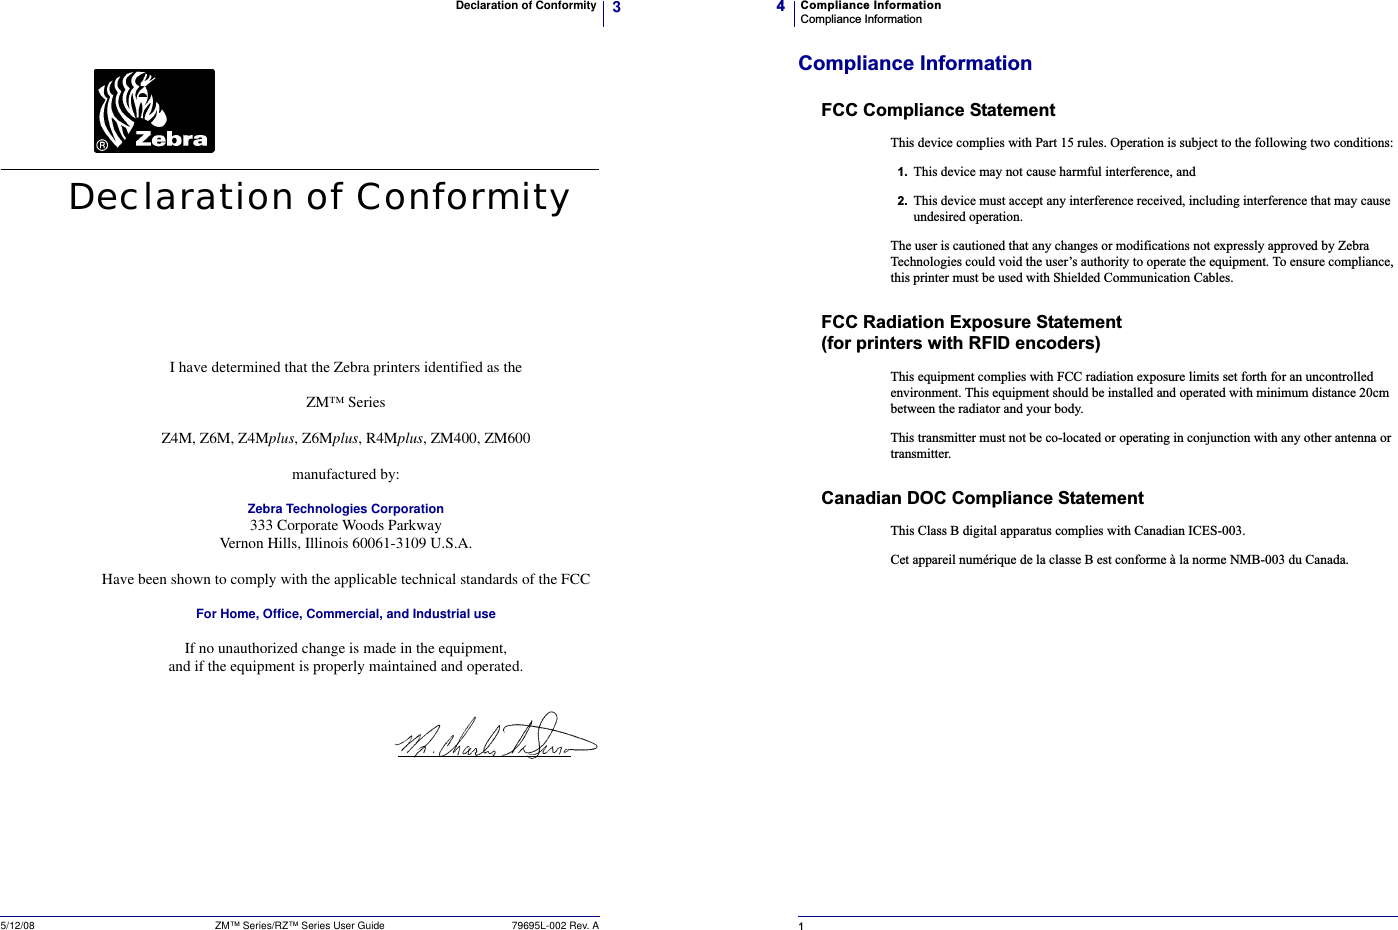 3Declaration of Conformity5/12/08 ZM™ Series/RZ™ Series User Guide 79695L-002 Rev. ADeclaration of ConformityI have determined that the Zebra printers identified as theZM™ SeriesZ4M, Z6M, Z4Mplus, Z6Mplus, R4Mplus, ZM400, ZM600manufactured by:Zebra Technologies Corporation333 Corporate Woods ParkwayVernon Hills, Illinois 60061-3109 U.S.A.Have been shown to comply with the applicable technical standards of the FCCFor Home, Office, Commercial, and Industrial useIf no unauthorized change is made in the equipment,and if the equipment is properly maintained and operated.Compliance InformationCompliance Information41Compliance InformationFCC Compliance StatementThis device complies with Part 15 rules. Operation is subject to the following two conditions:1. This device may not cause harmful interference, and2. This device must accept any interference received, including interference that may cause undesired operation.The user is cautioned that any changes or modifications not expressly approved by Zebra Technologies could void the user’s authority to operate the equipment. To ensure compliance, this printer must be used with Shielded Communication Cables.FCC Radiation Exposure Statement (for printers with RFID encoders)This equipment complies with FCC radiation exposure limits set forth for an uncontrolled environment. This equipment should be installed and operated with minimum distance 20cm between the radiator and your body.This transmitter must not be co-located or operating in conjunction with any other antenna or transmitter.Canadian DOC Compliance StatementThis Class B digital apparatus complies with Canadian ICES-003. Cet appareil numérique de la classe B est conforme à la norme NMB-003 du Canada.